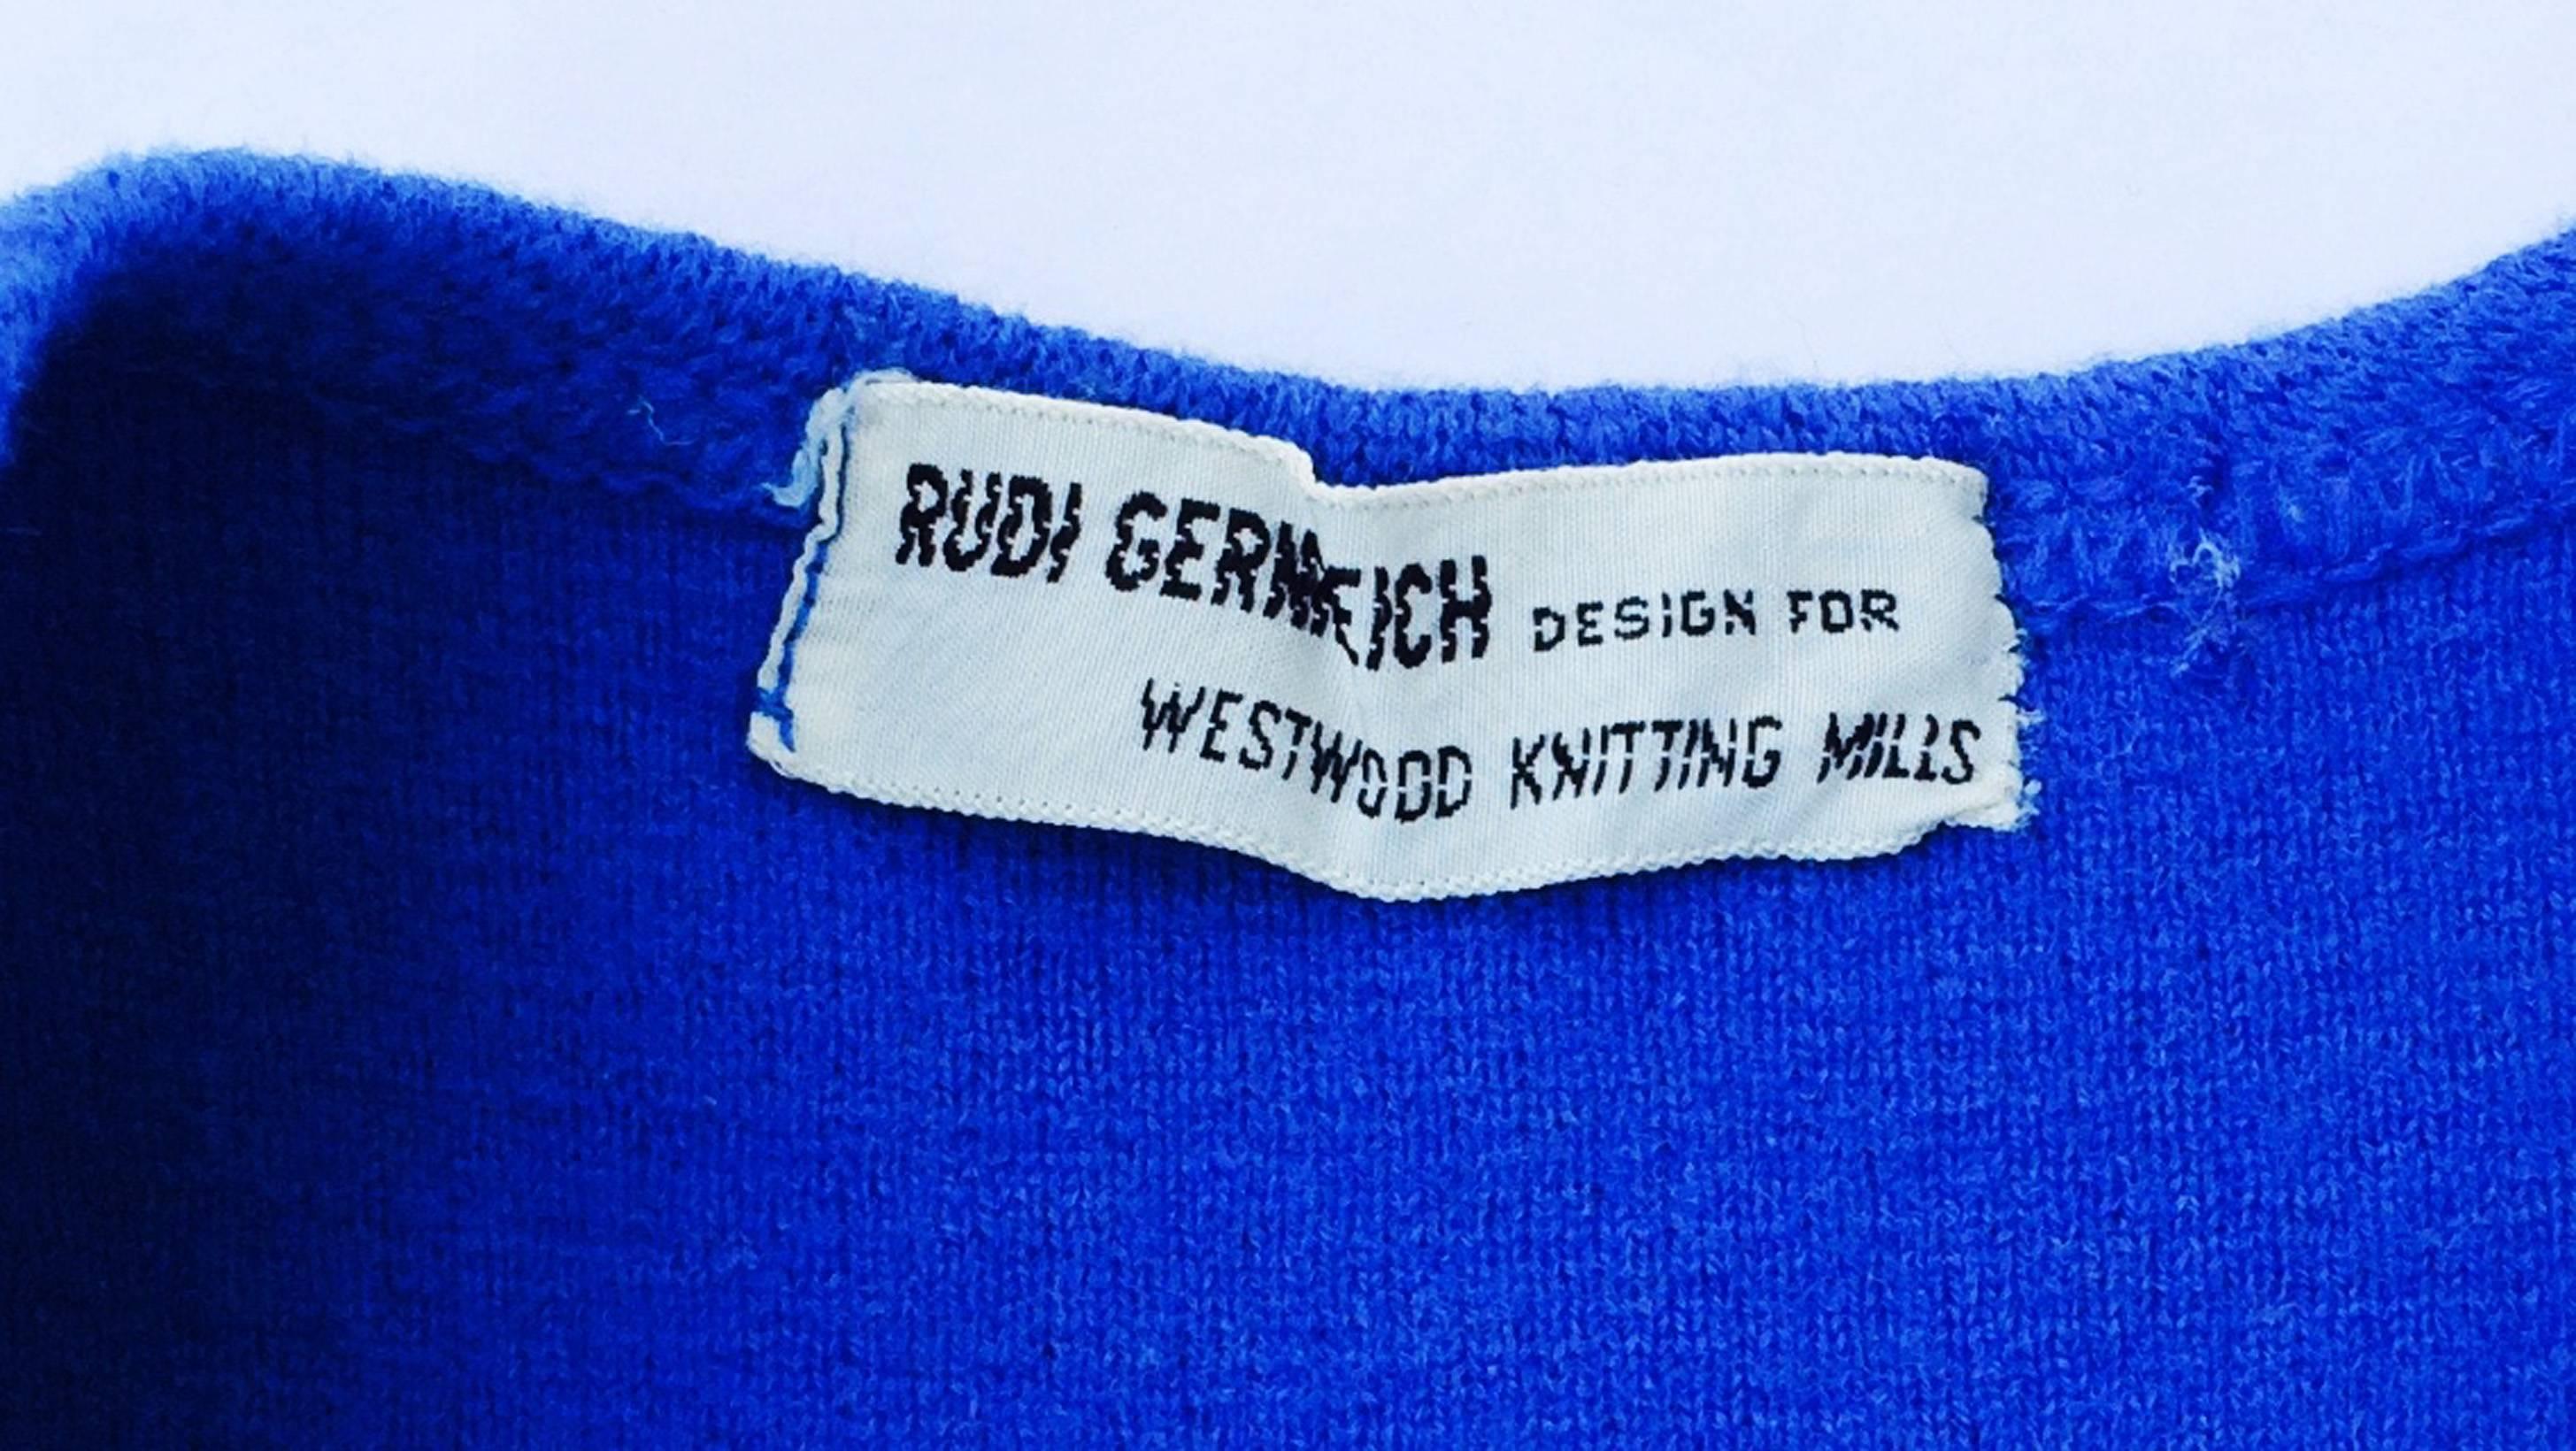 A fine and rare vintage Rudi Gernreich maillot swimsuit. Blue wool knit fabric item features large contrasting mother of pearl decorative button front. A rare survivor in excellent condition.